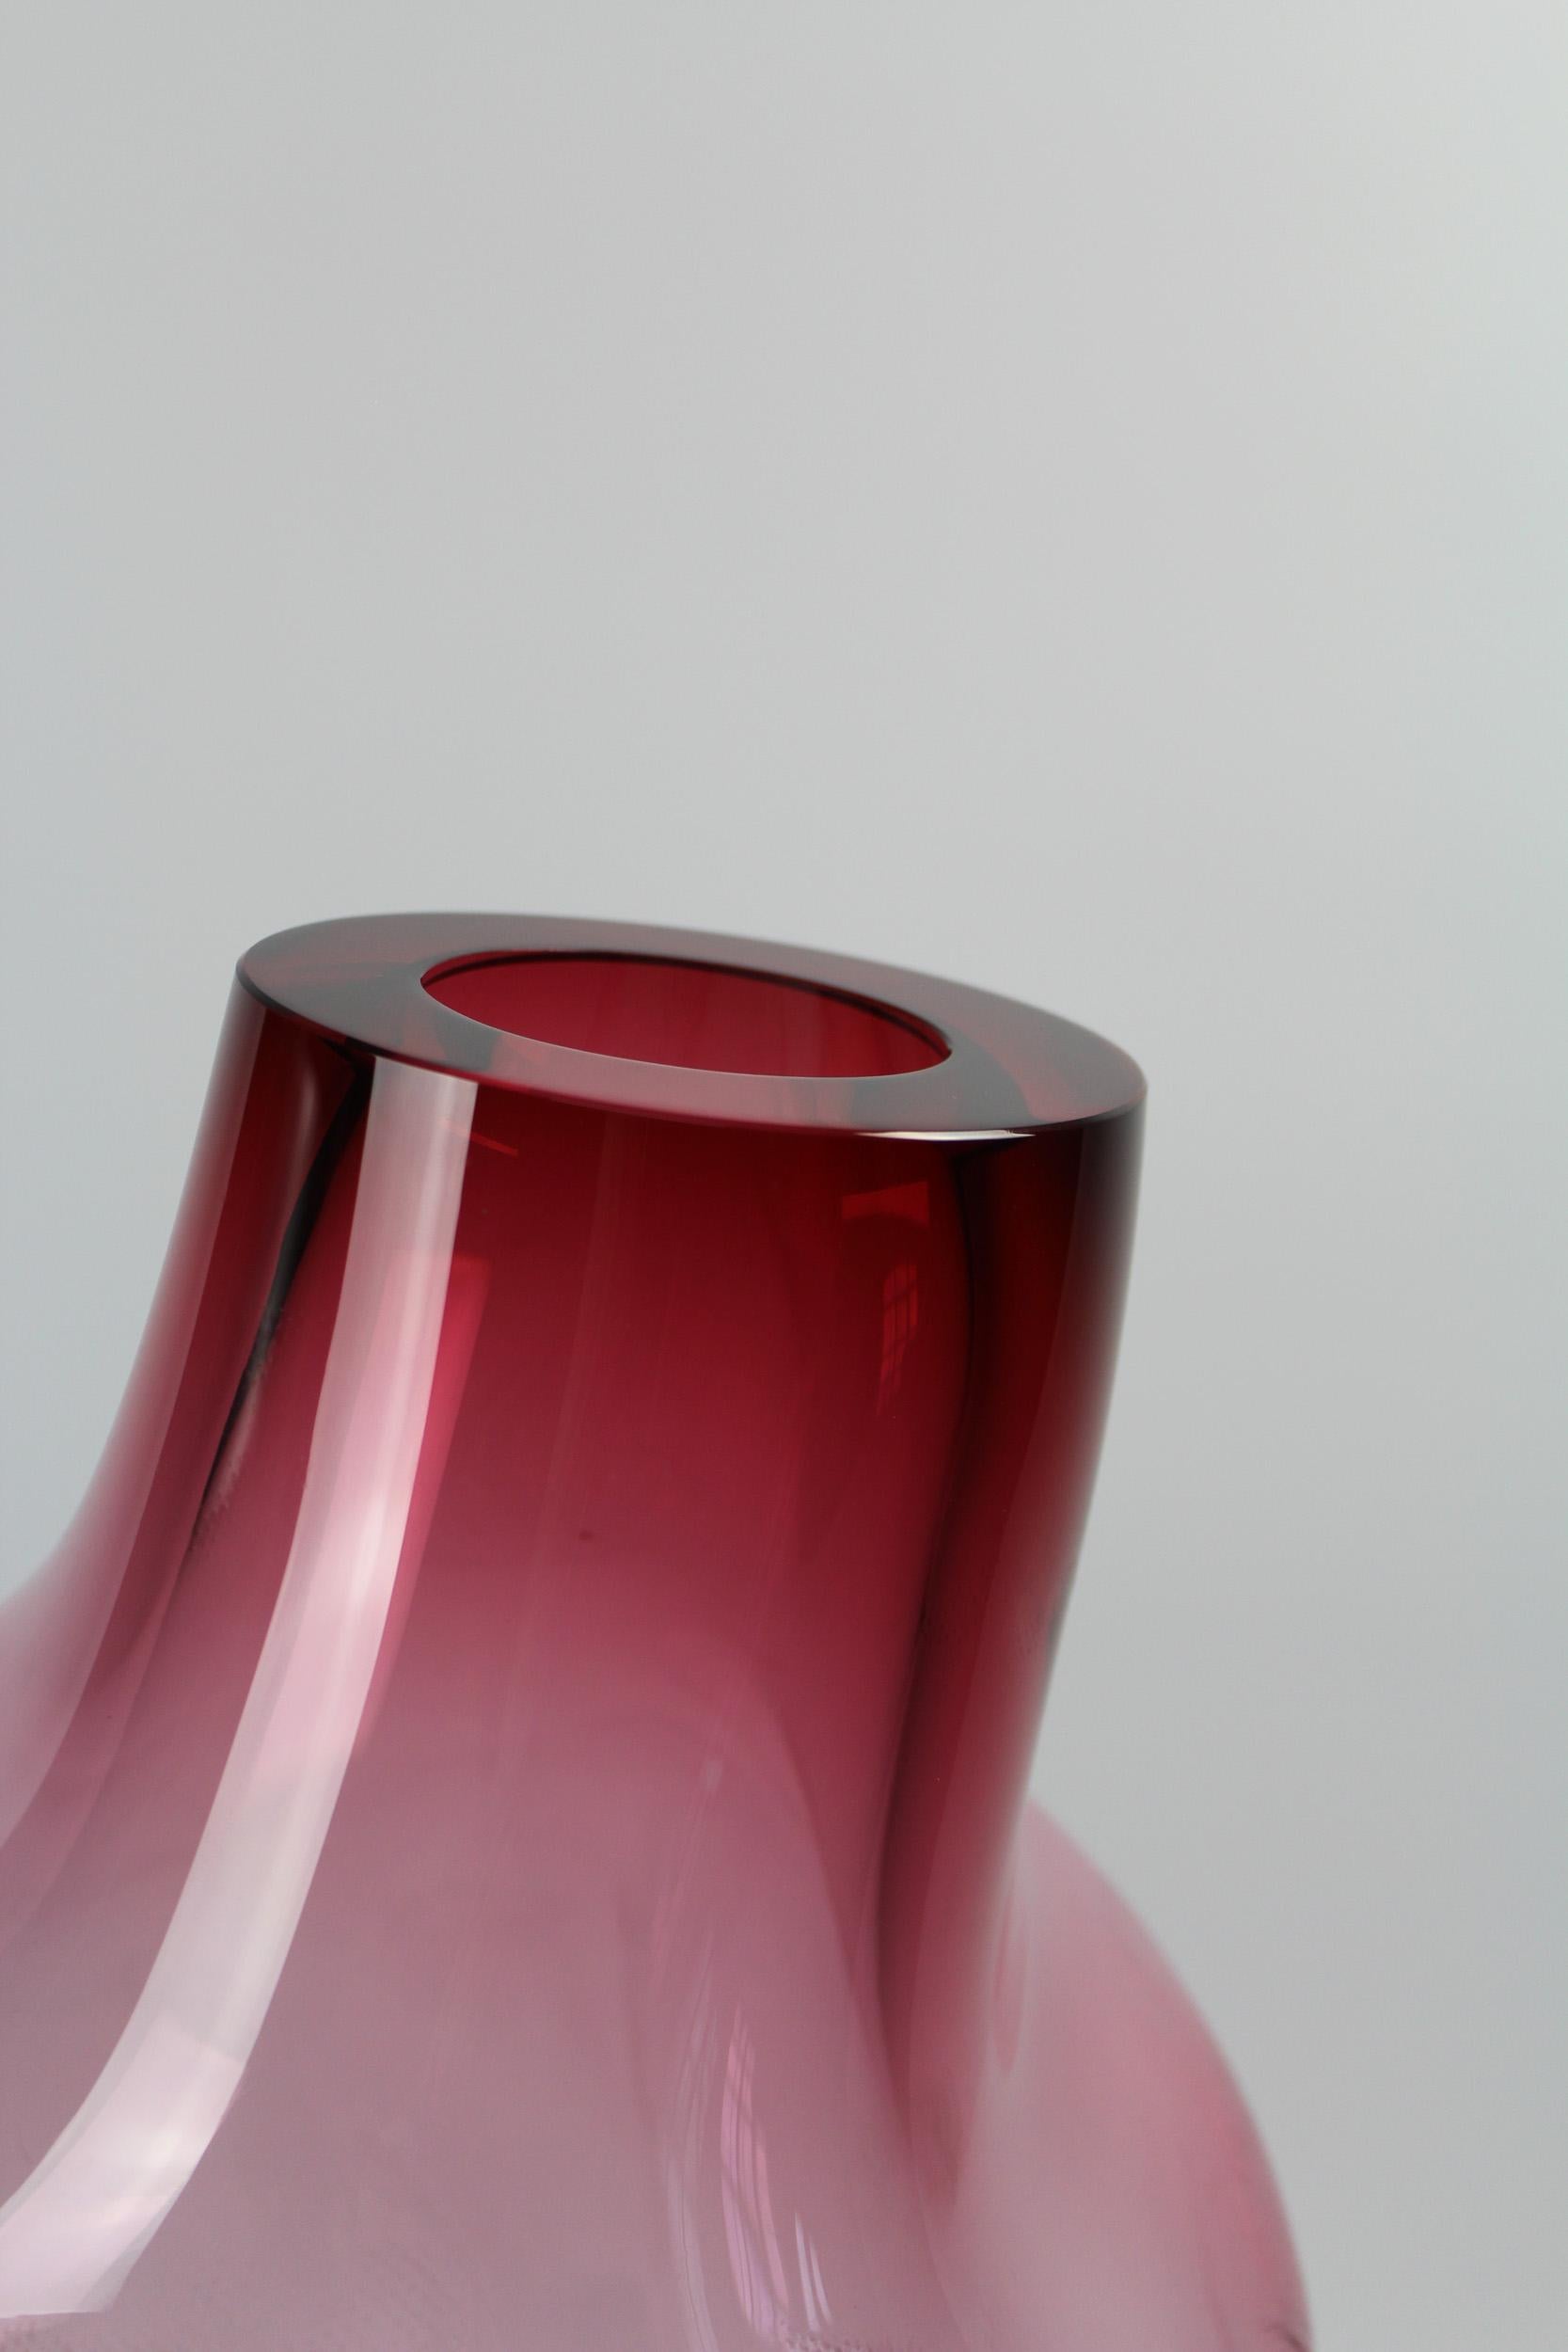 105 Ltr Forms, Fuchsia, Handmade Glass Object by Vogel Studio For Sale 1